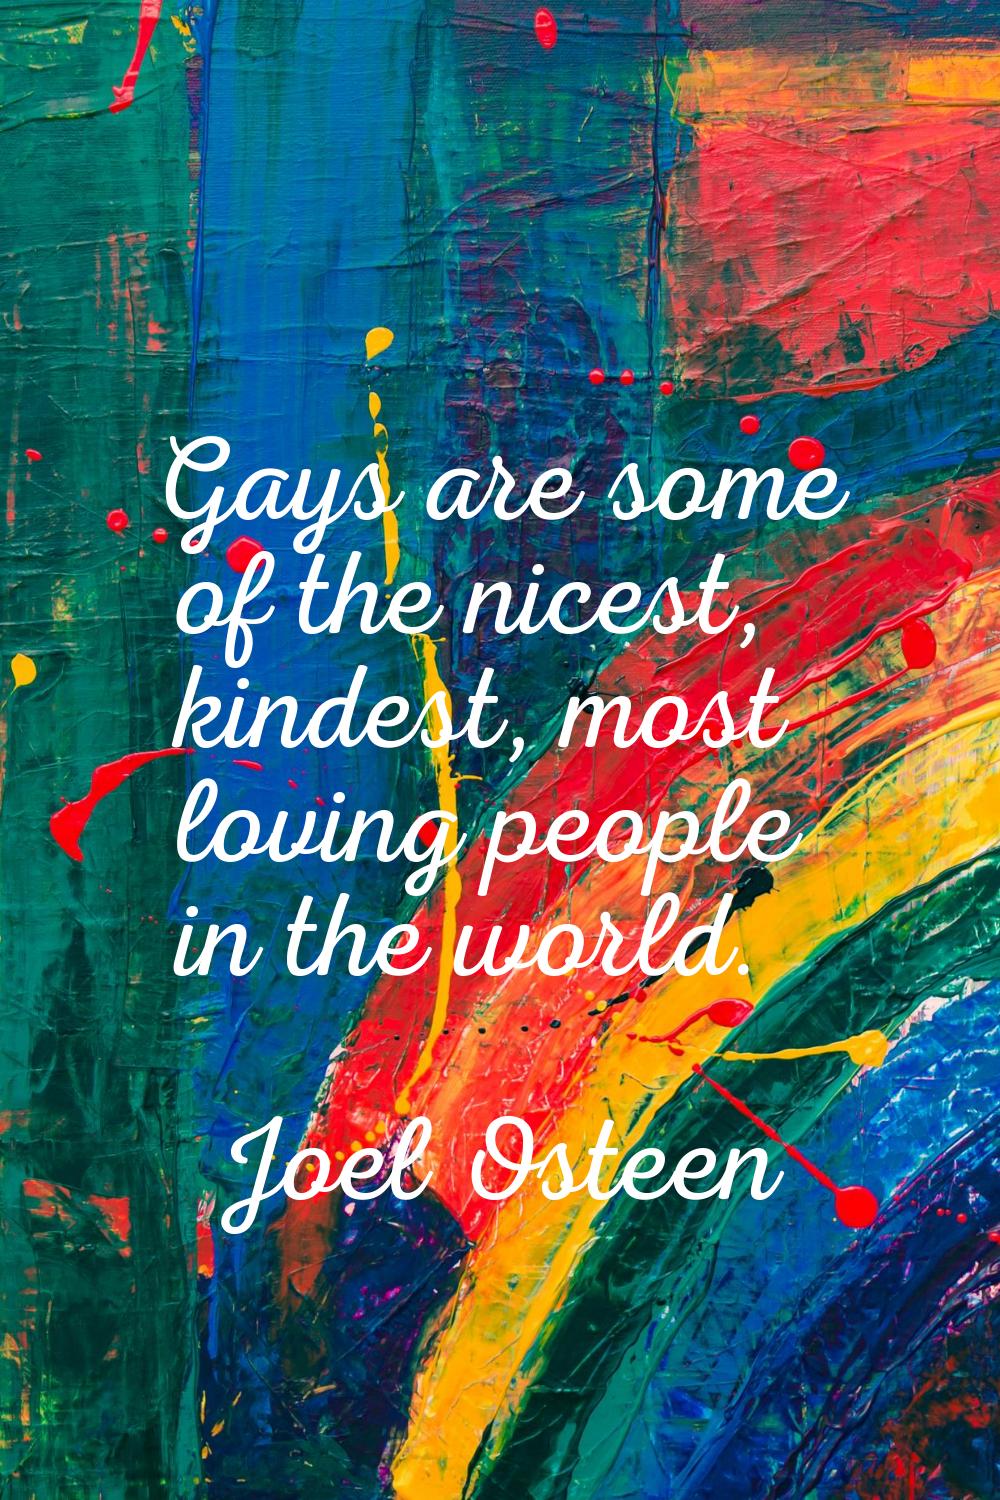 Gays are some of the nicest, kindest, most loving people in the world.